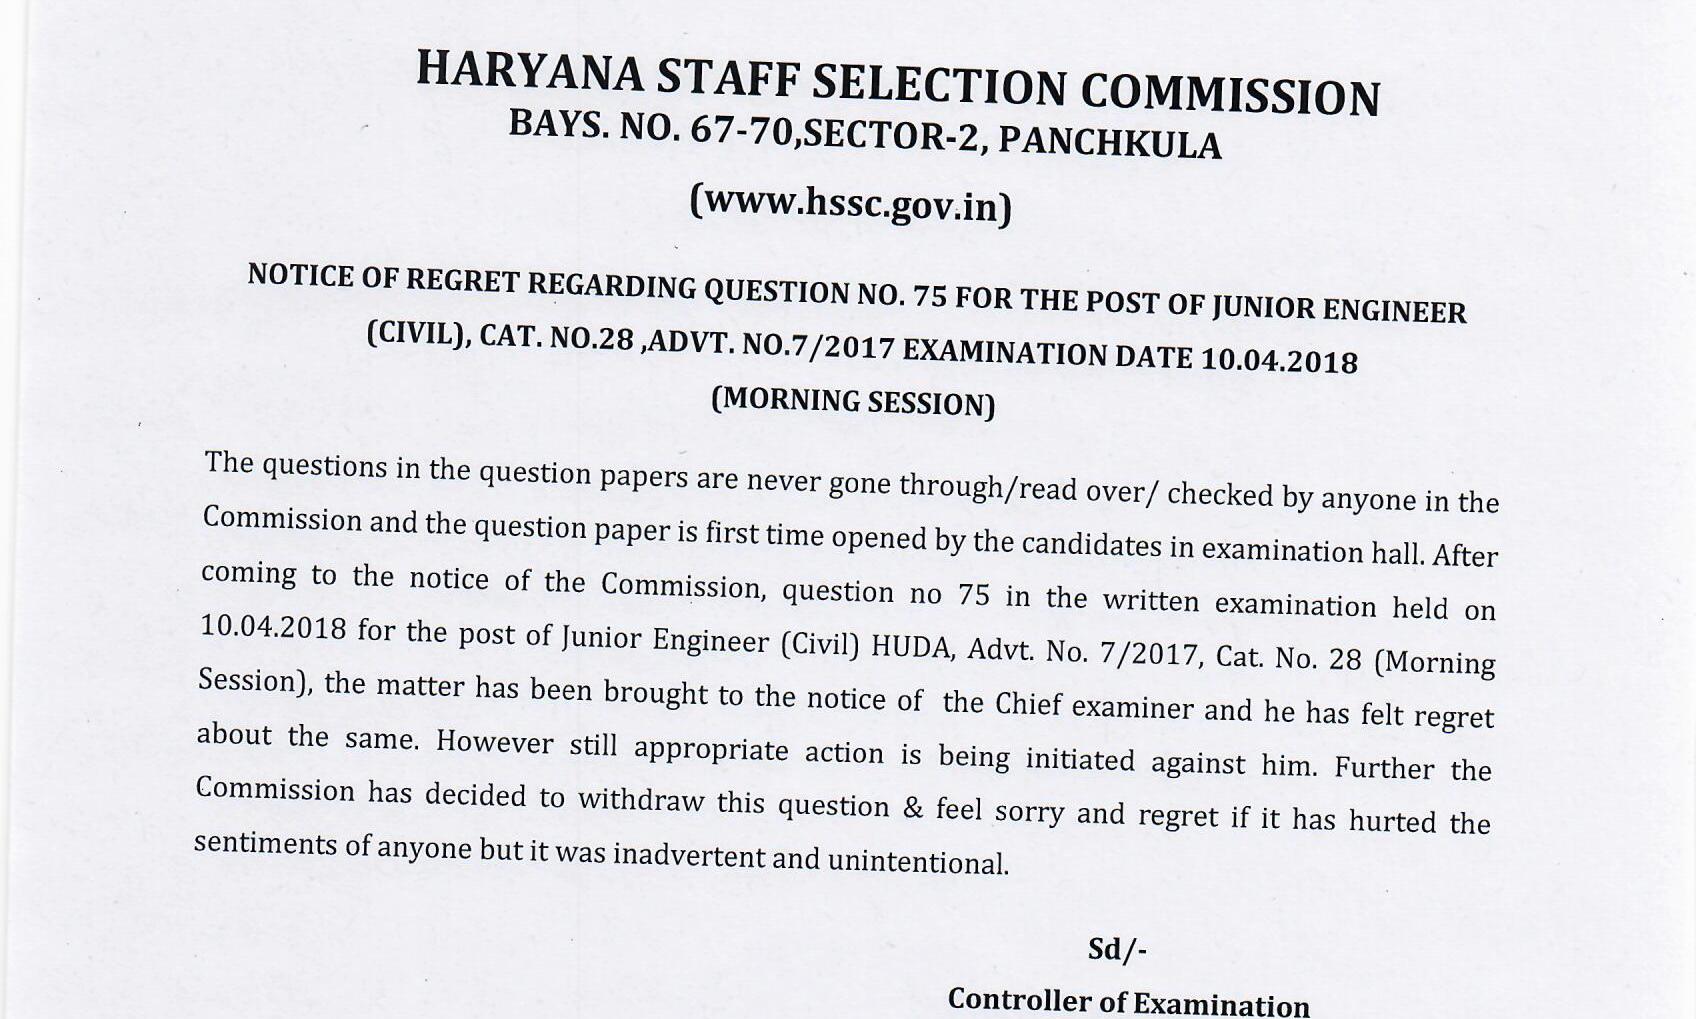 Sex and Caste overtones in Haryana Staff Selection Service exam